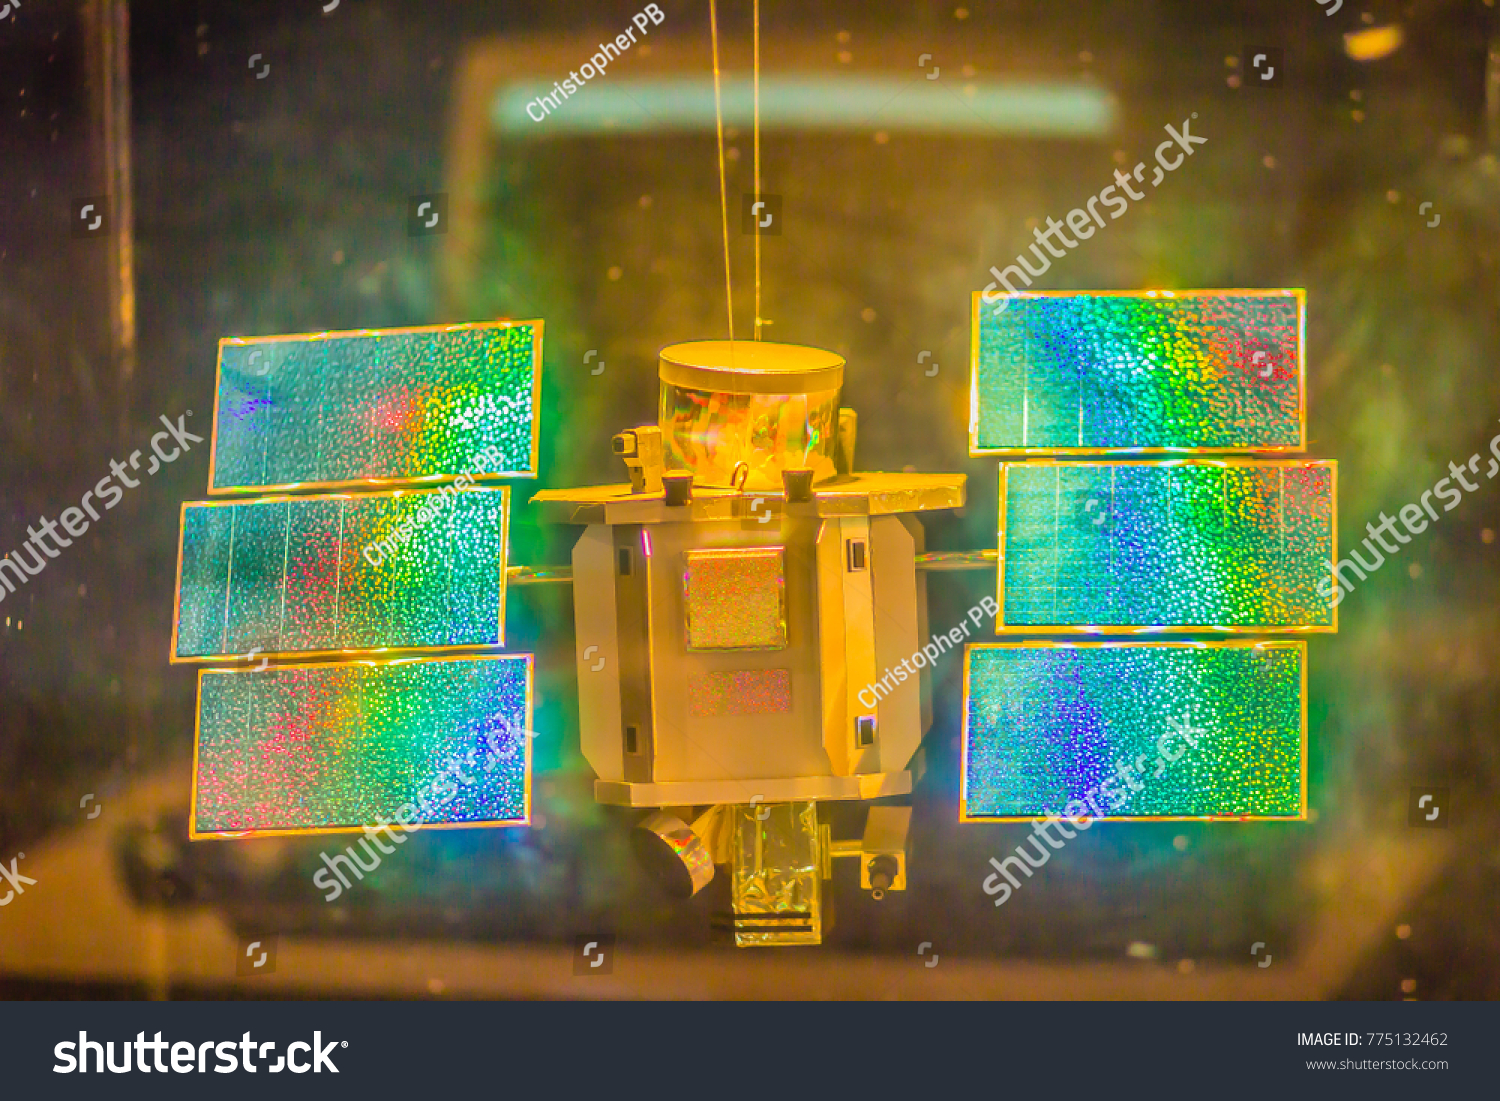 Bangkok, Thailand - November 4, 2017: Model of QuickBird, a high-resolution commercial earth observation satellite, owned by DigitalGlobe launched in 2001 and decayed in 2015 at Bangkok Planetarium. #775132462